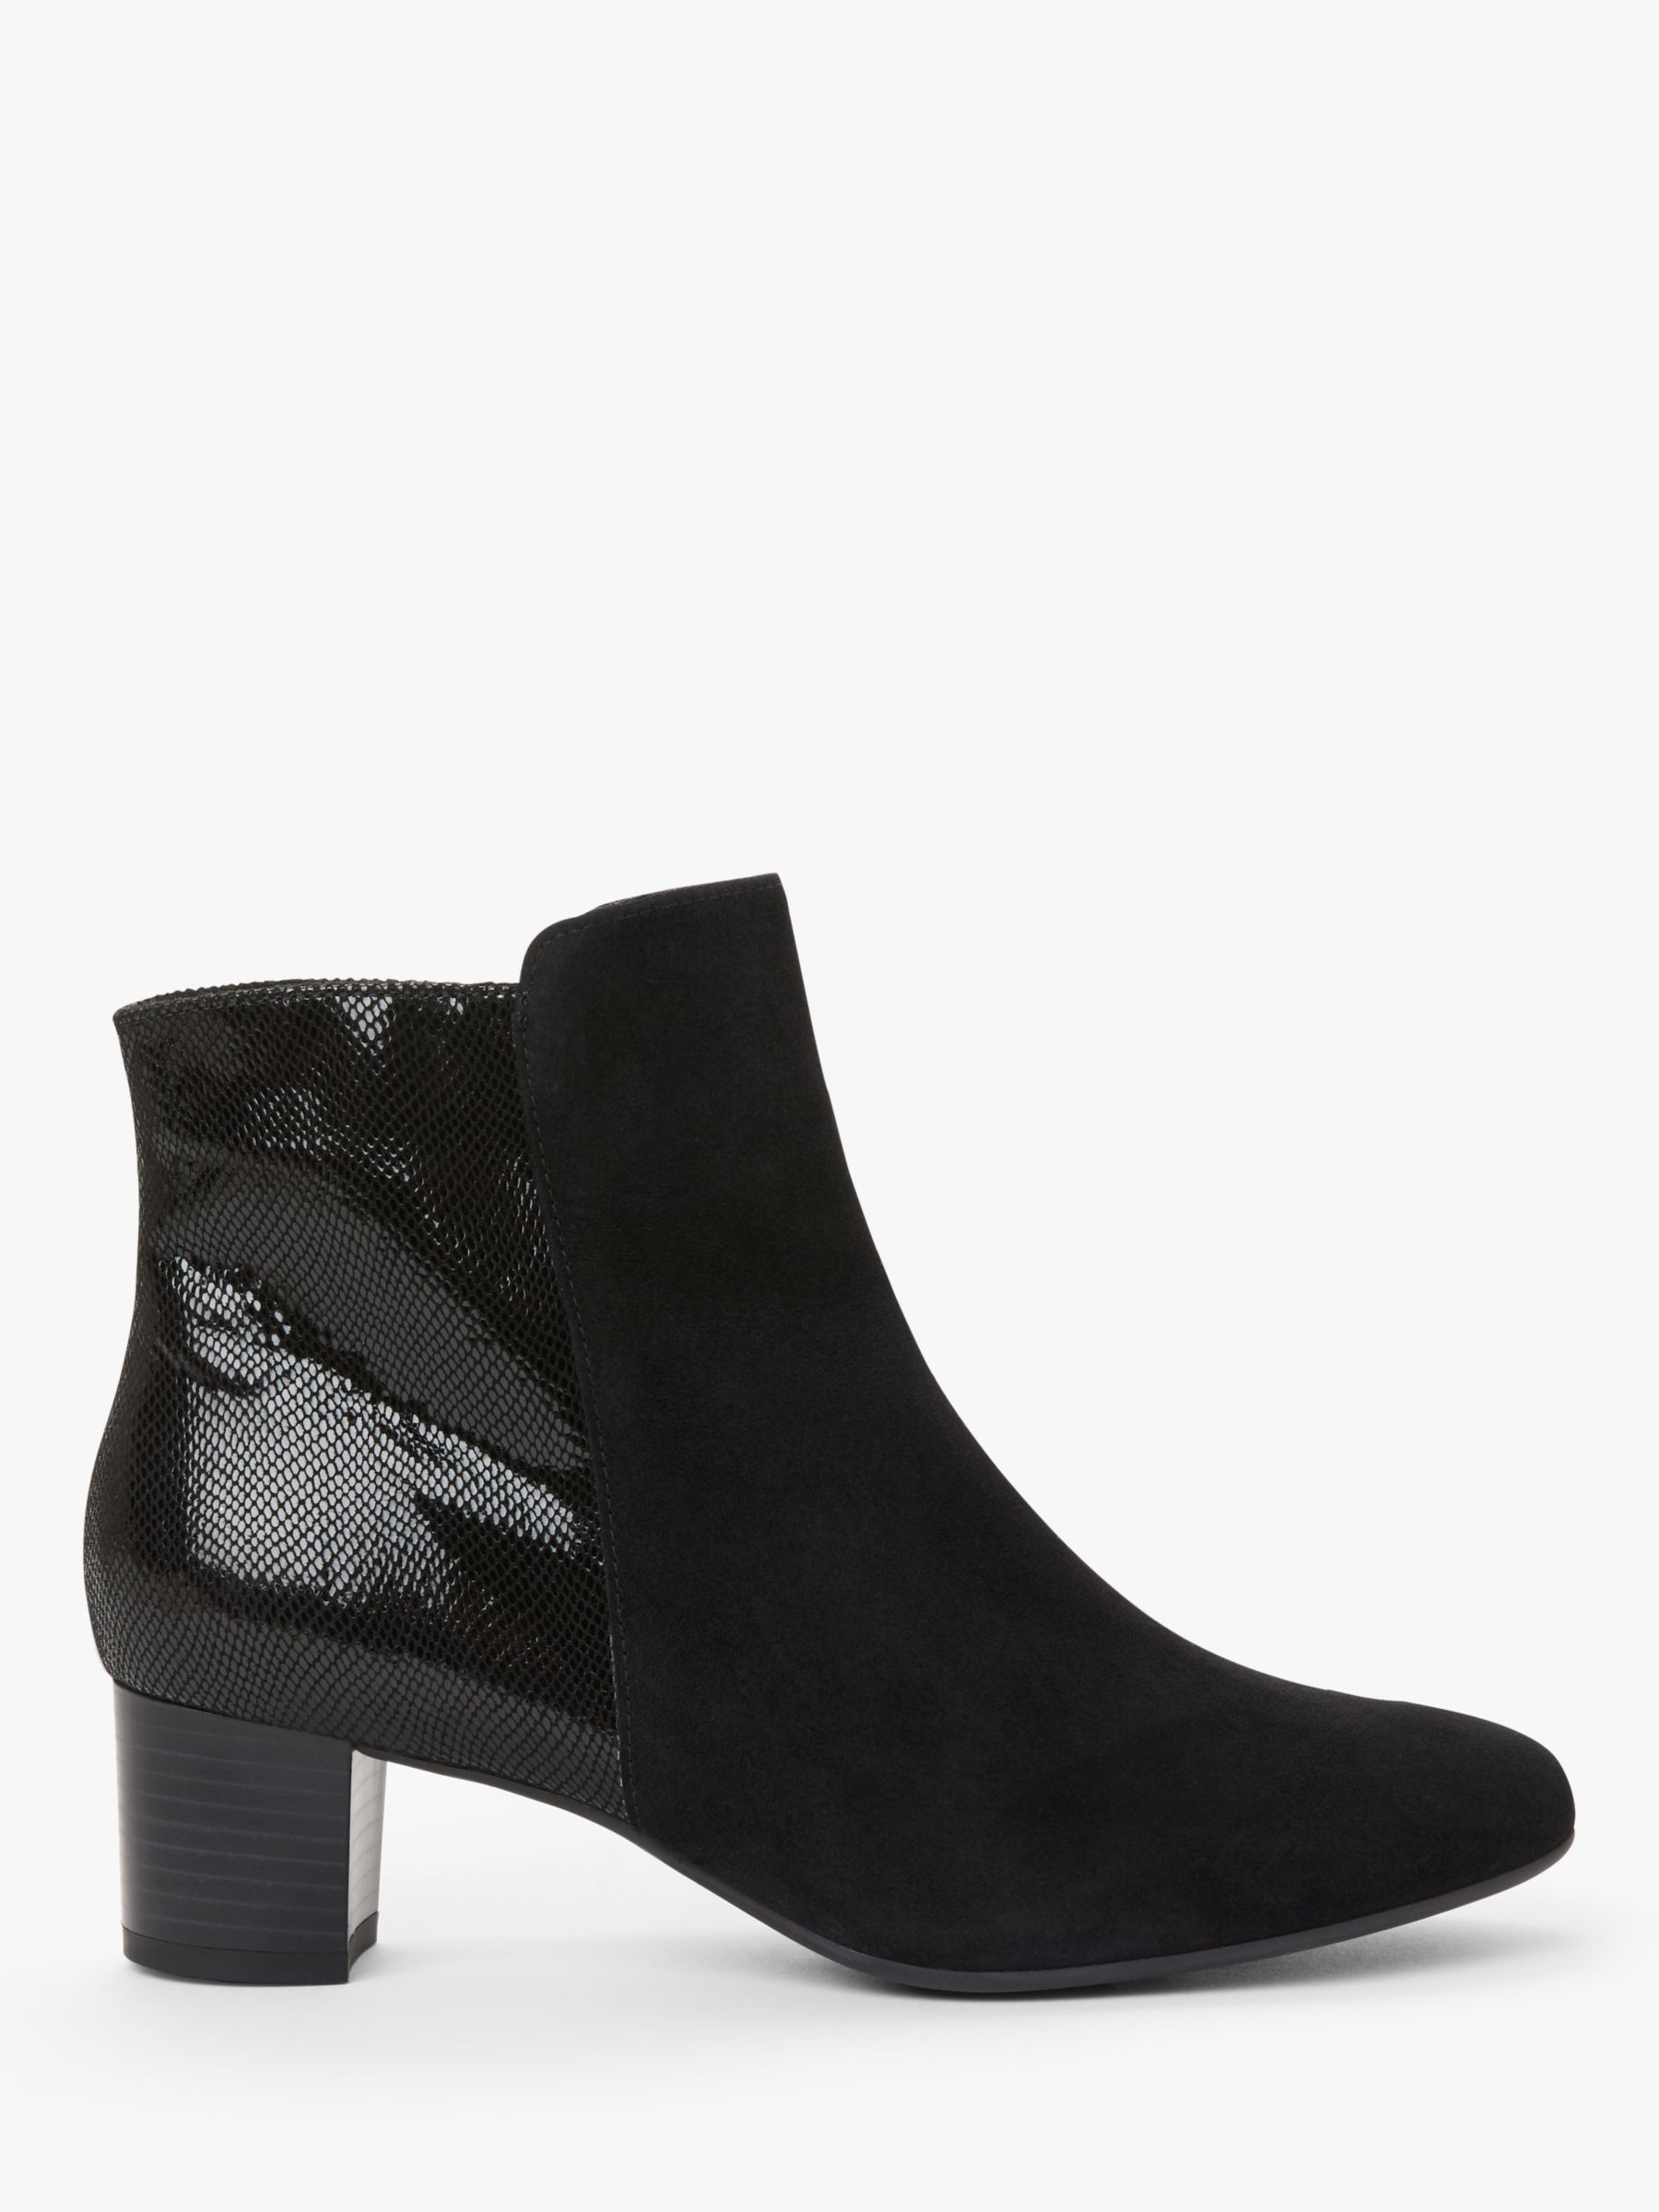 croc ankle boots womens